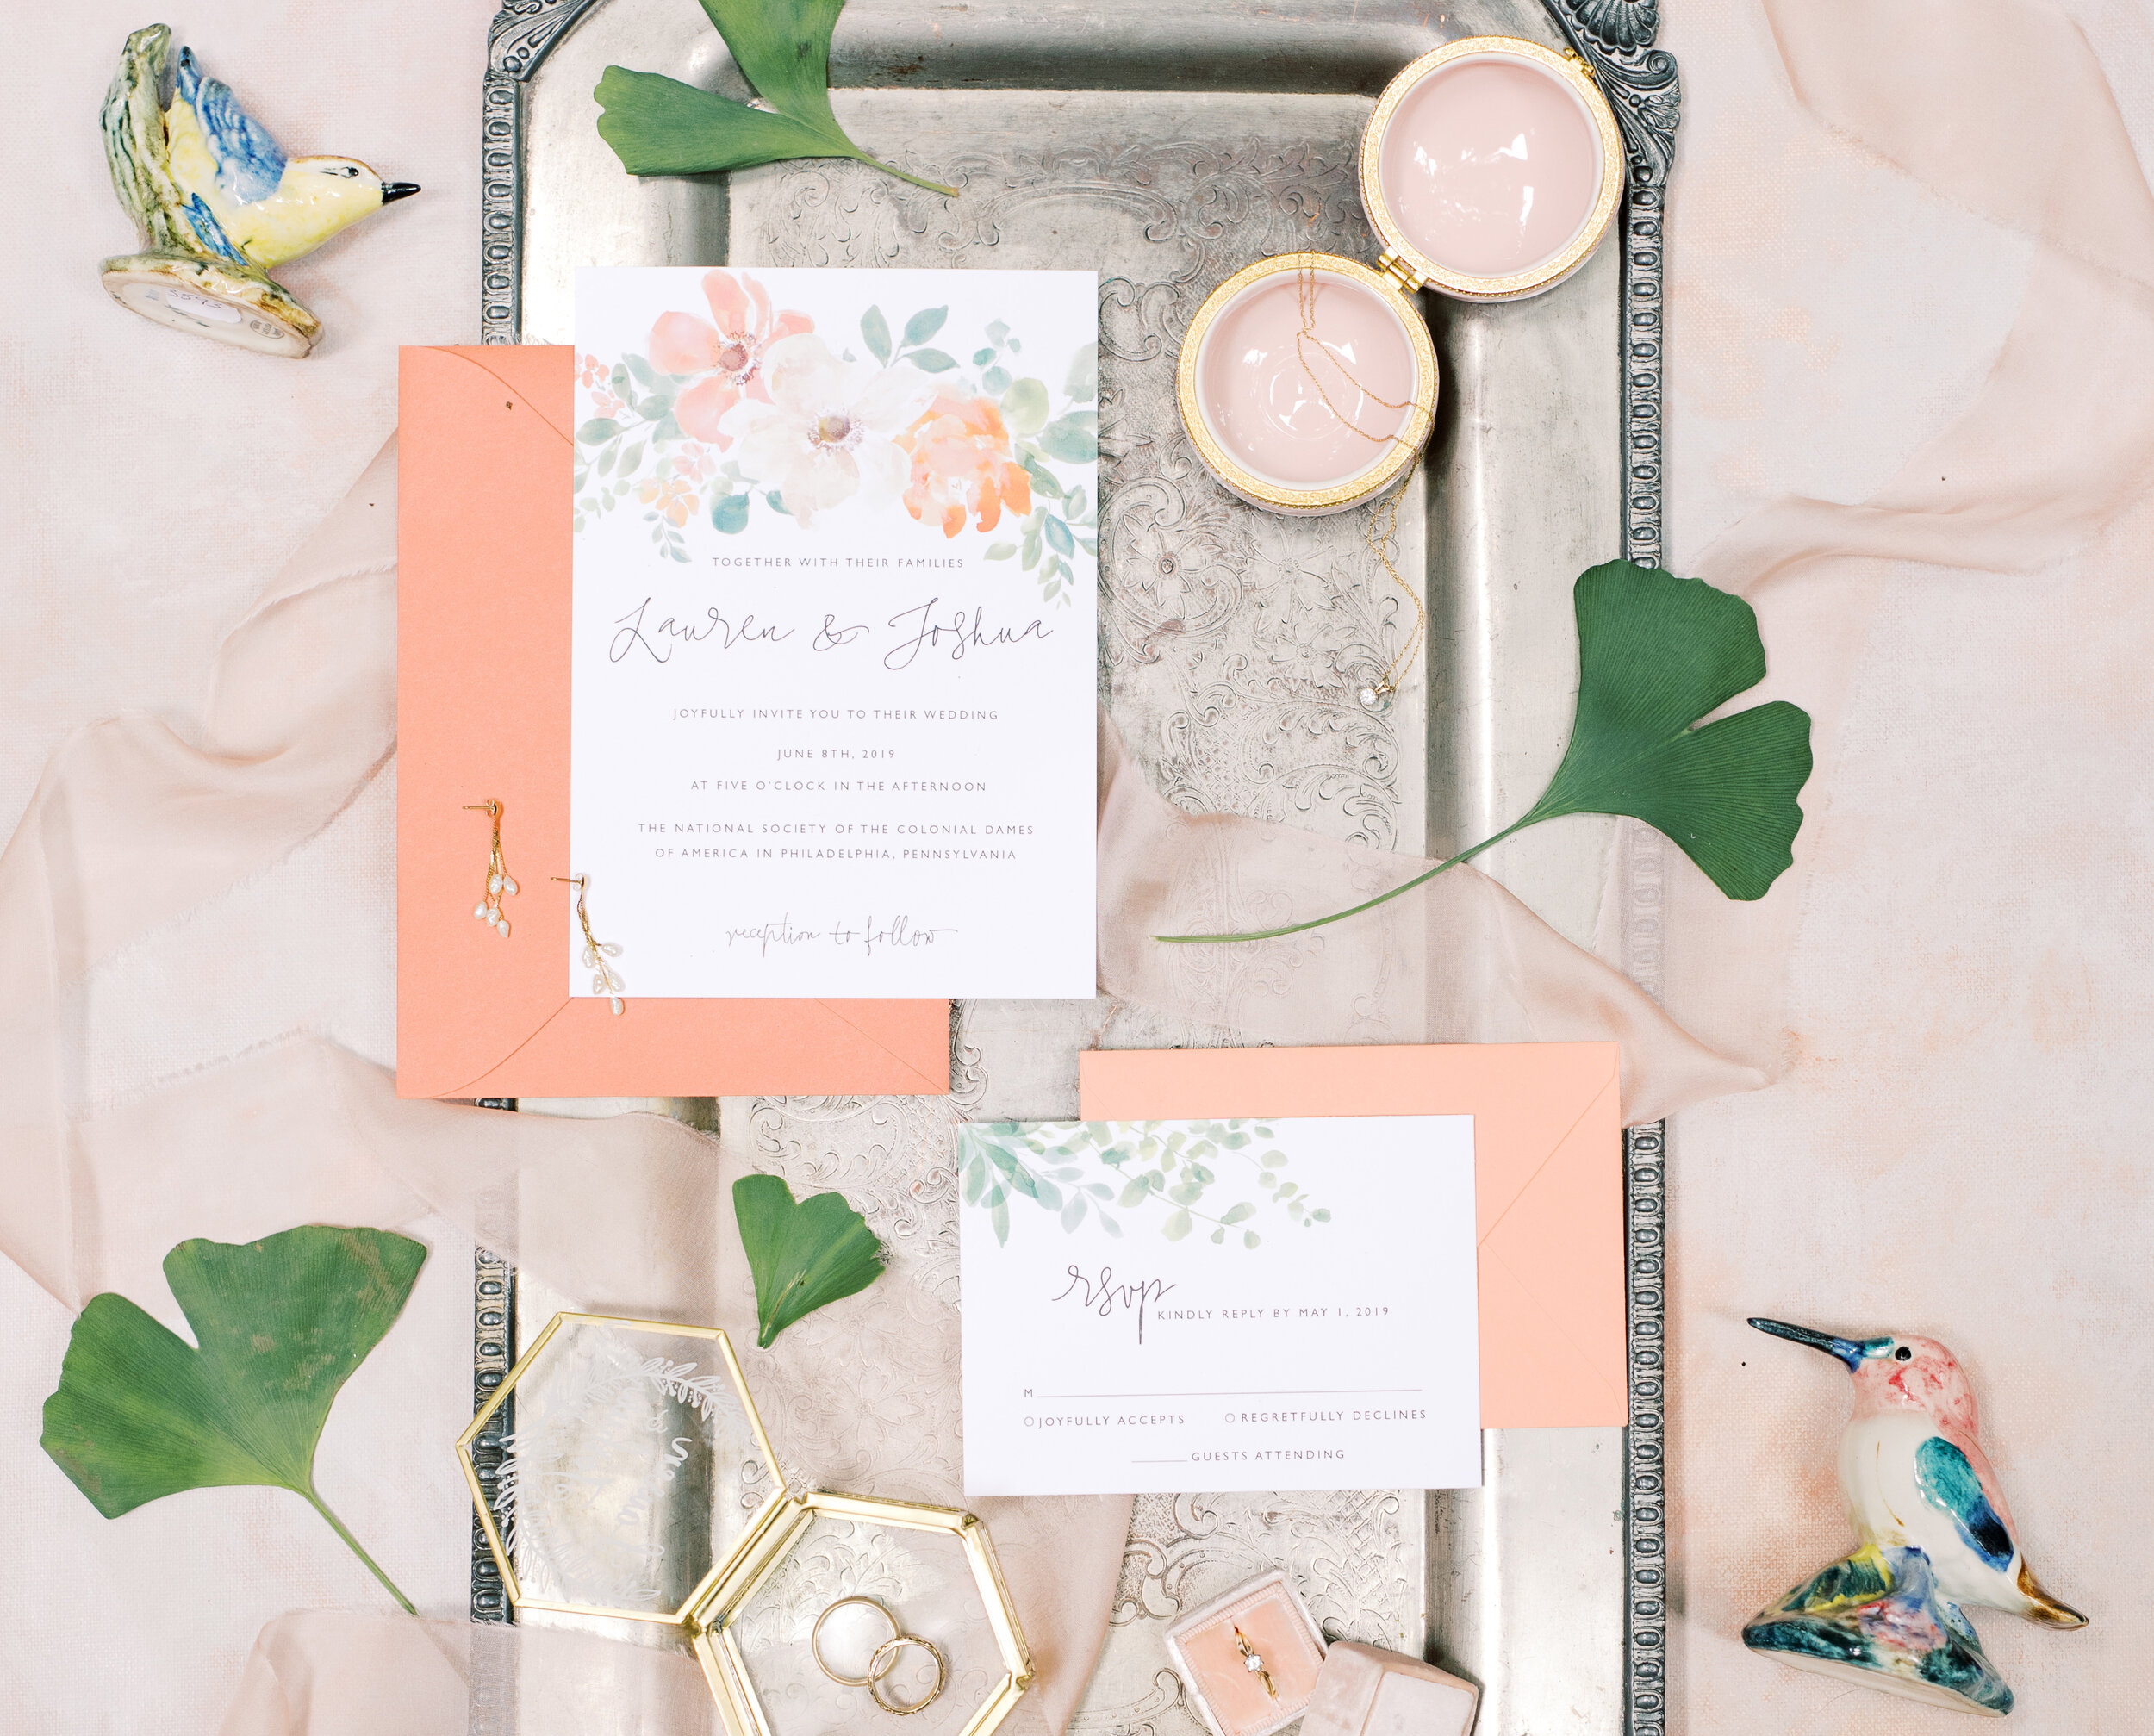 Invitations designed by Jacqueline Quinn of Philly DIY Wedding for Lauren and Josh - June 2019 / photo by Haley Richter